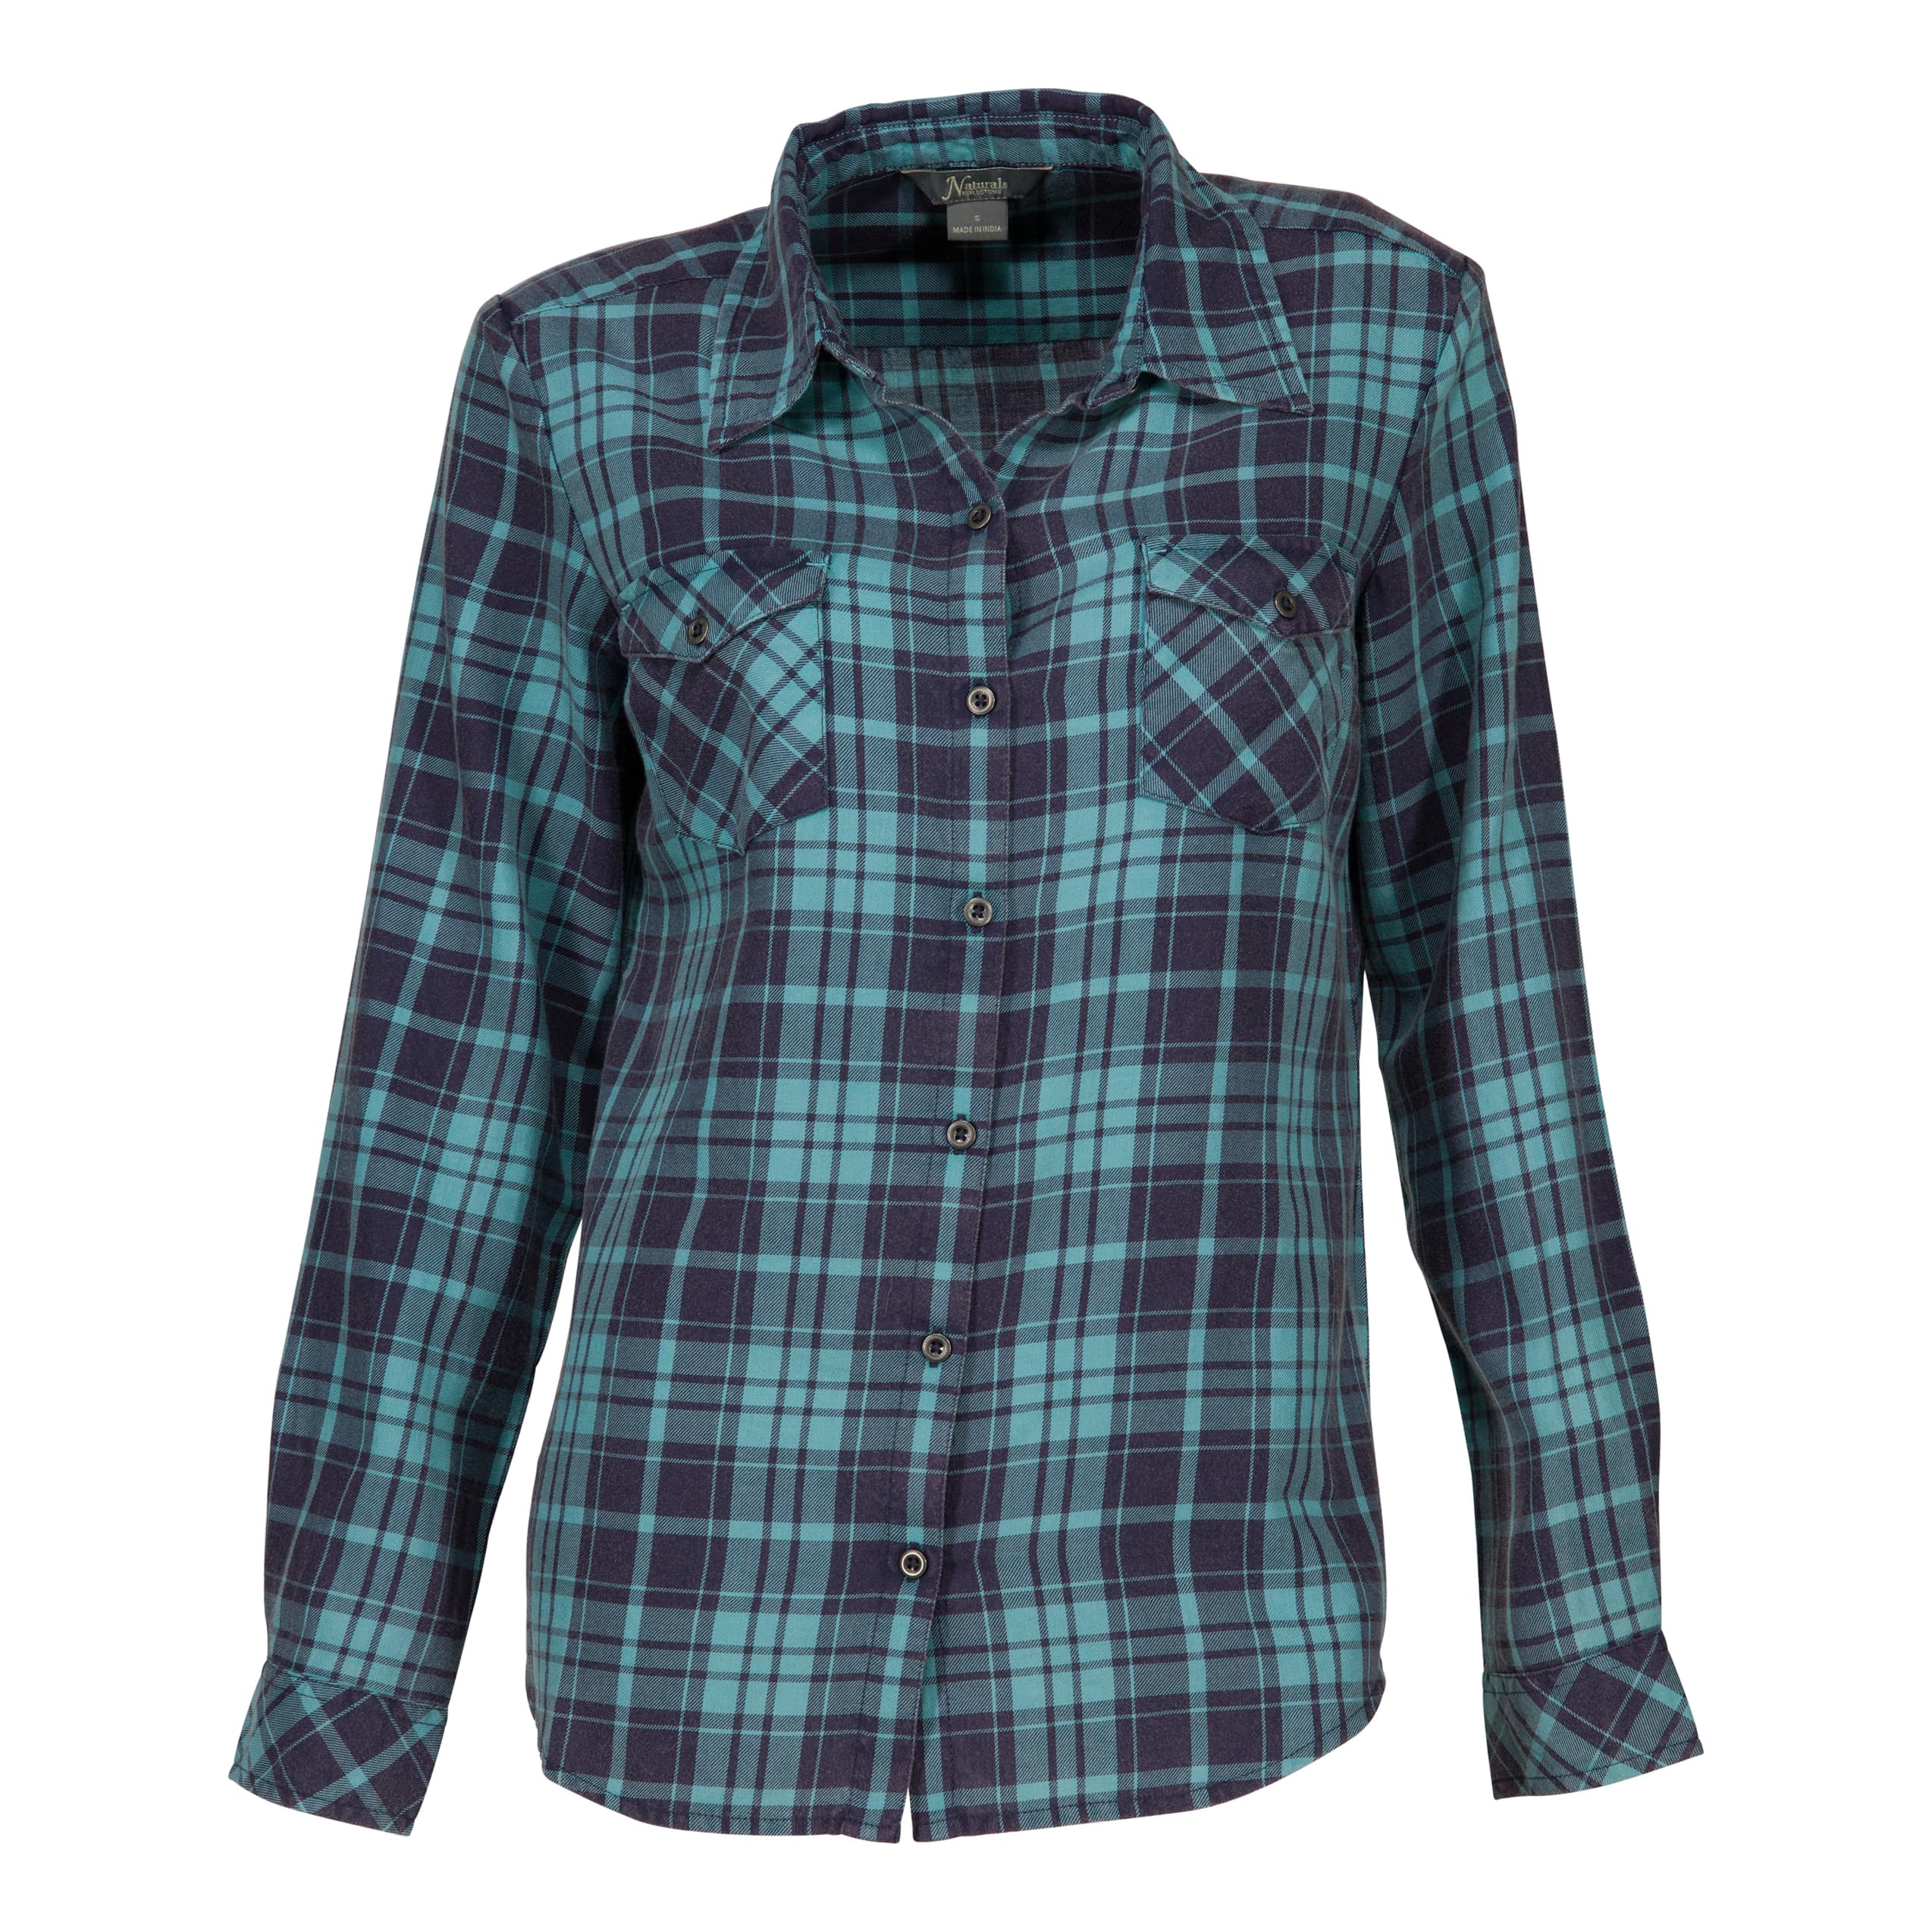 Natural Reflections® Women’s Acid-Washed Plaid Shirt - Turquoise/Blue